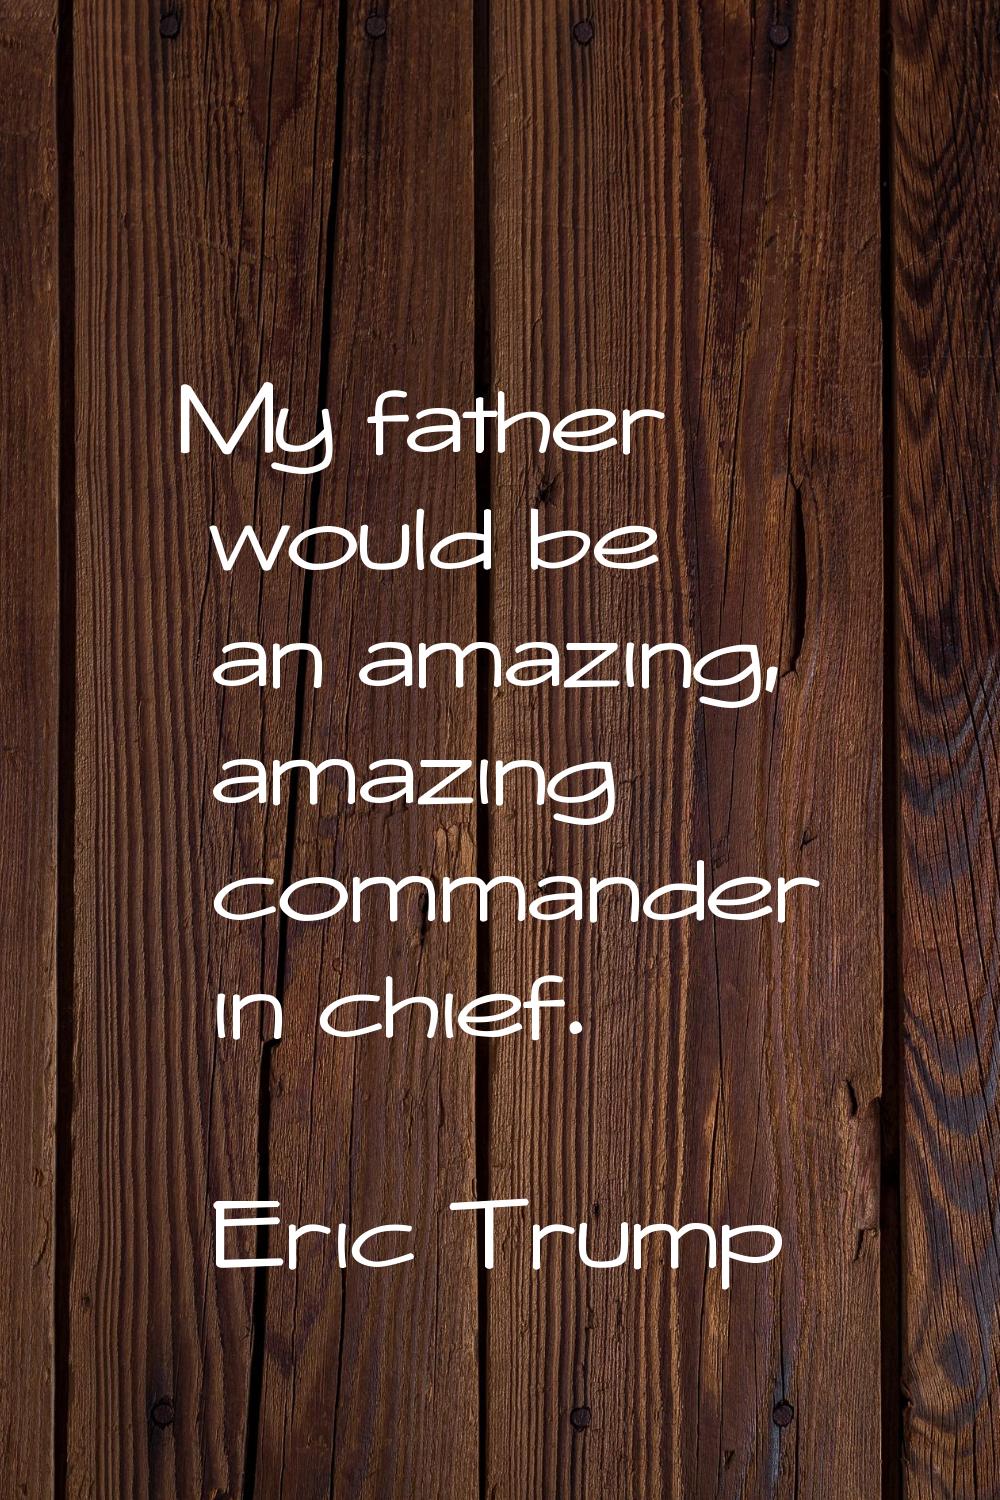 My father would be an amazing, amazing commander in chief.